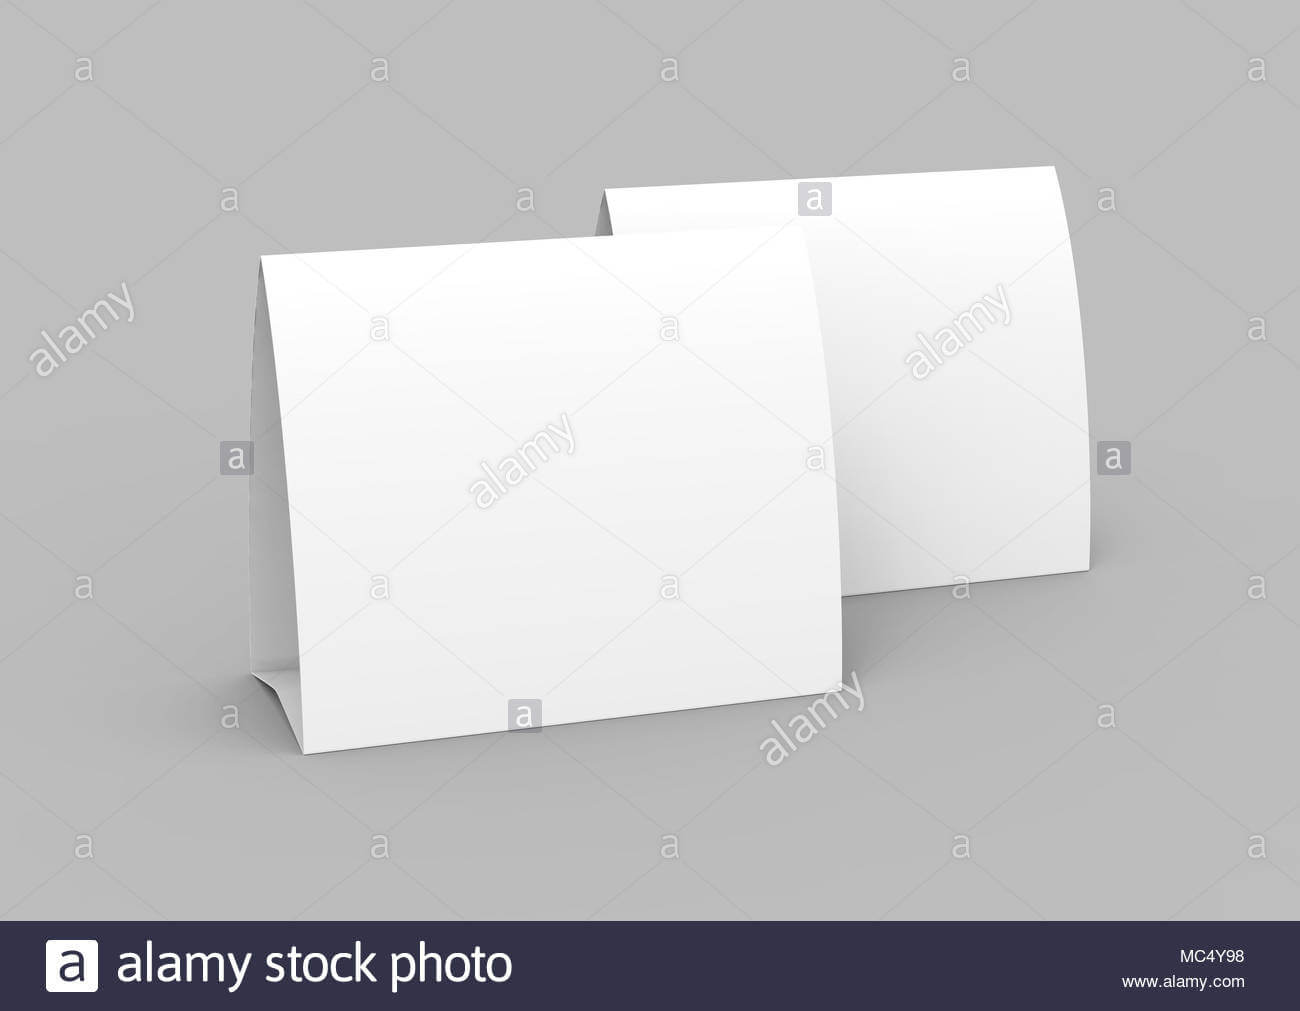 Blank Paper Tent Template, White Tent Cards Set With Empty In Blank Tent Card Template